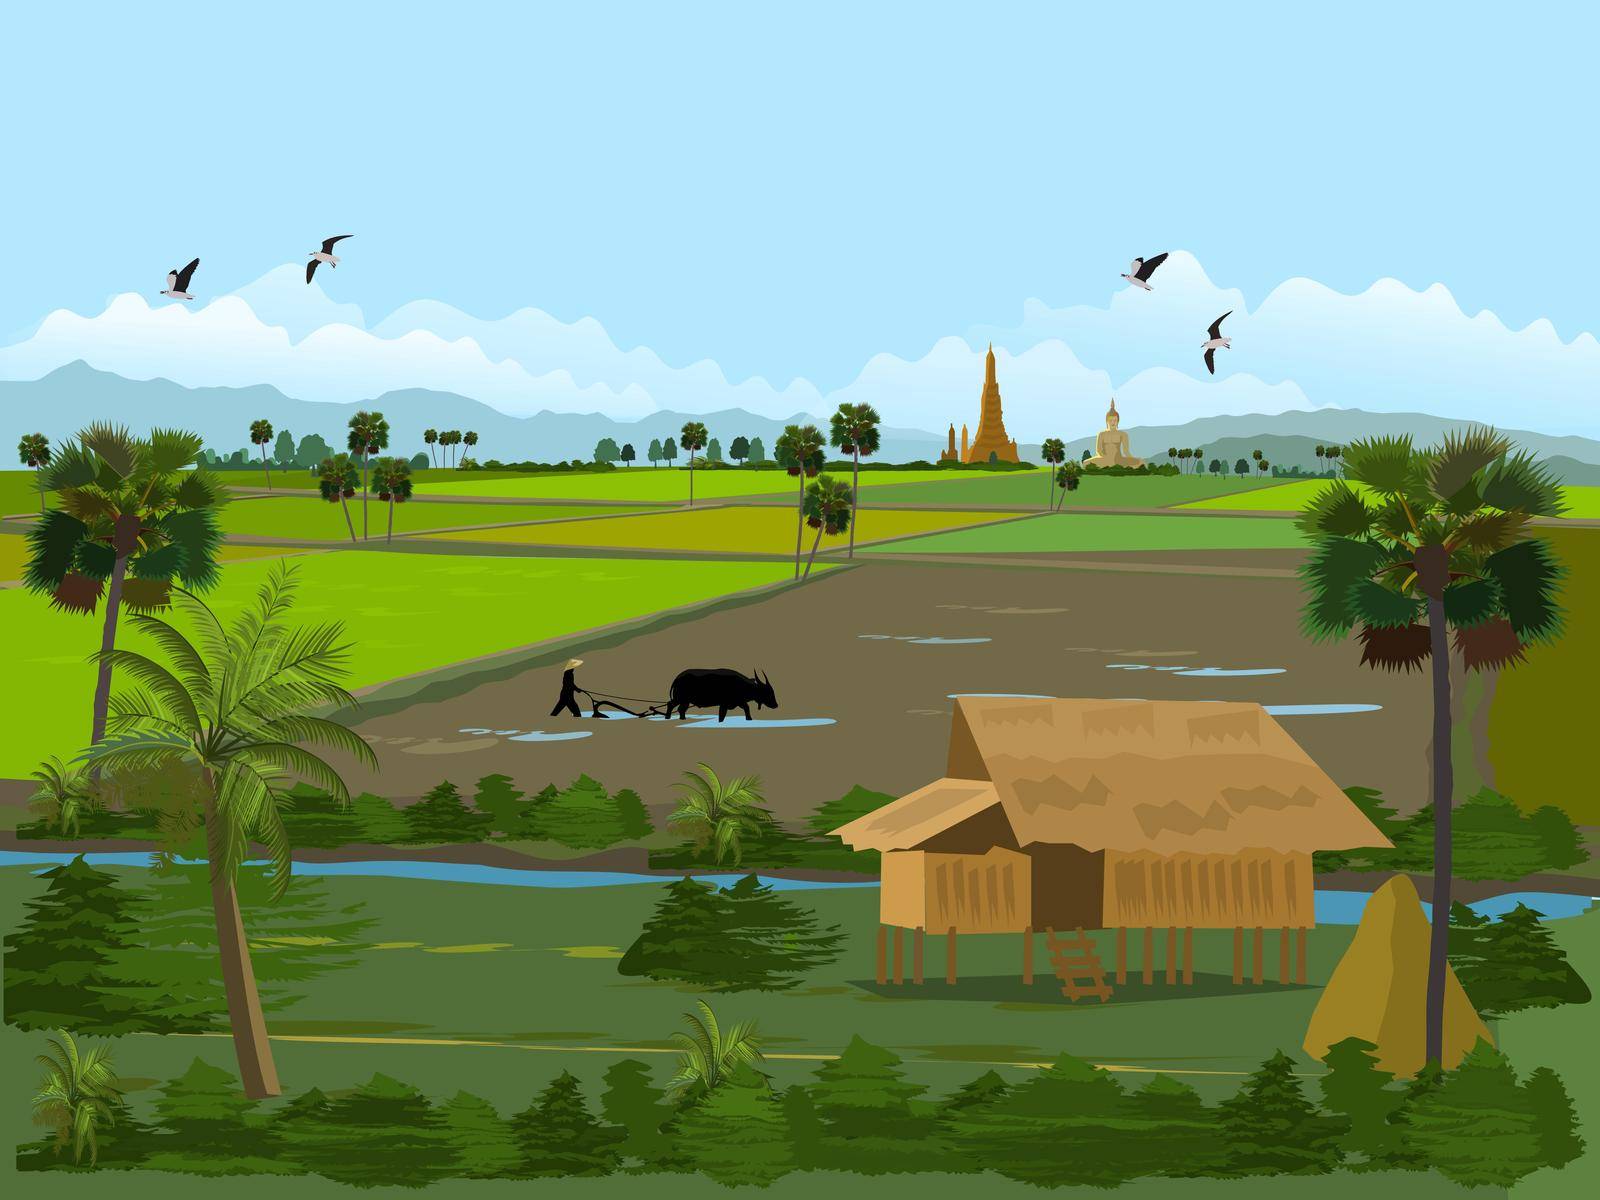 Rice fields in Thailand. Farmers' houses in green fields. Farmers plowing fields with sugar palm trees, rice fields, mountains, Buddhist temples and sky as the background. by moo12